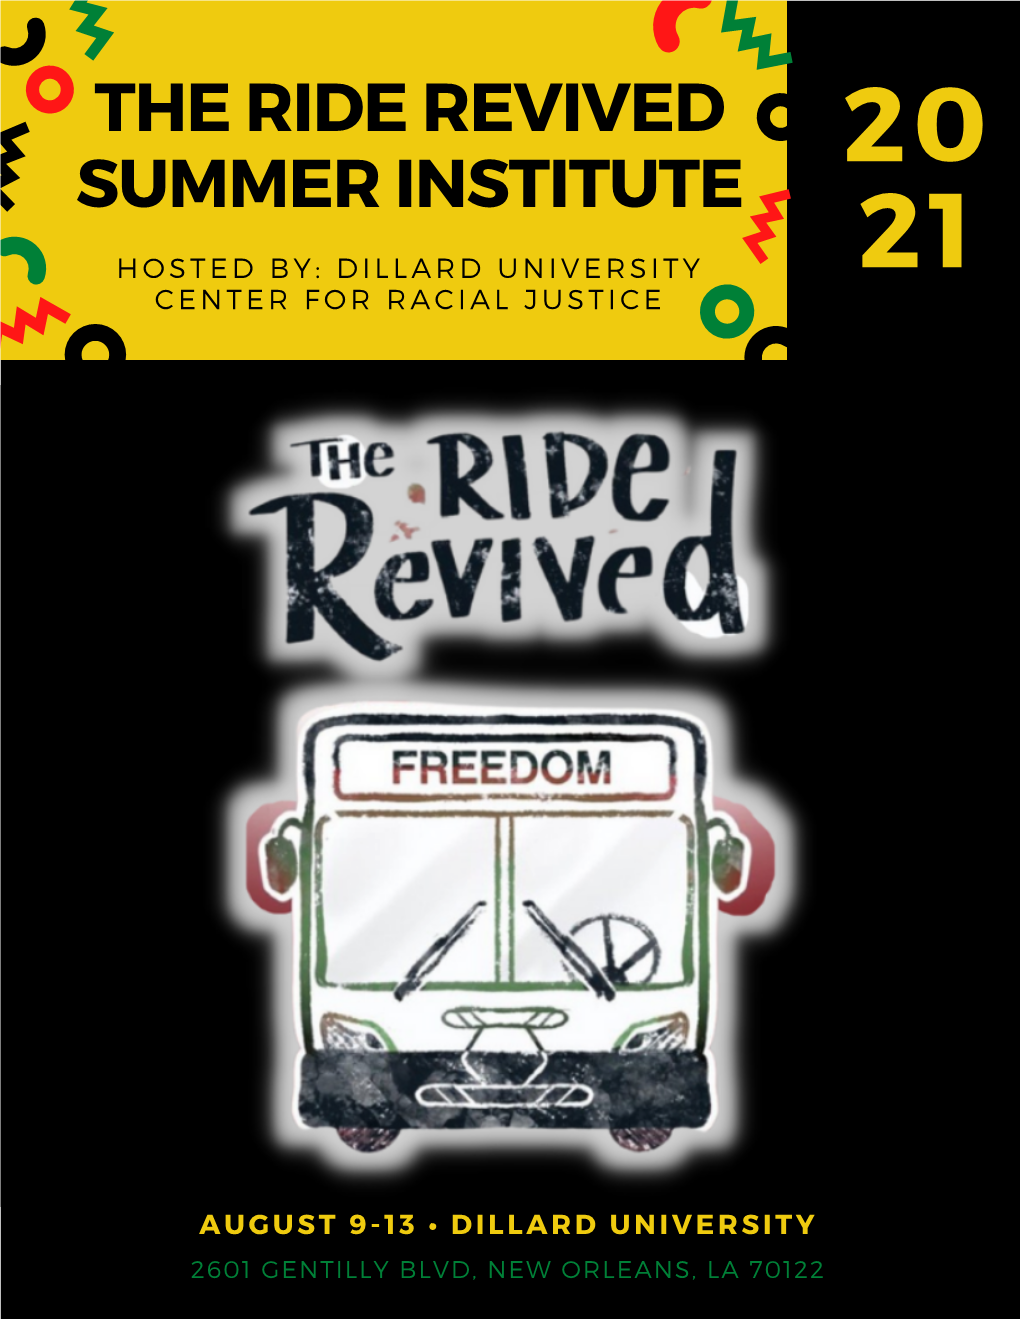 The Ride Revived Summer Institute